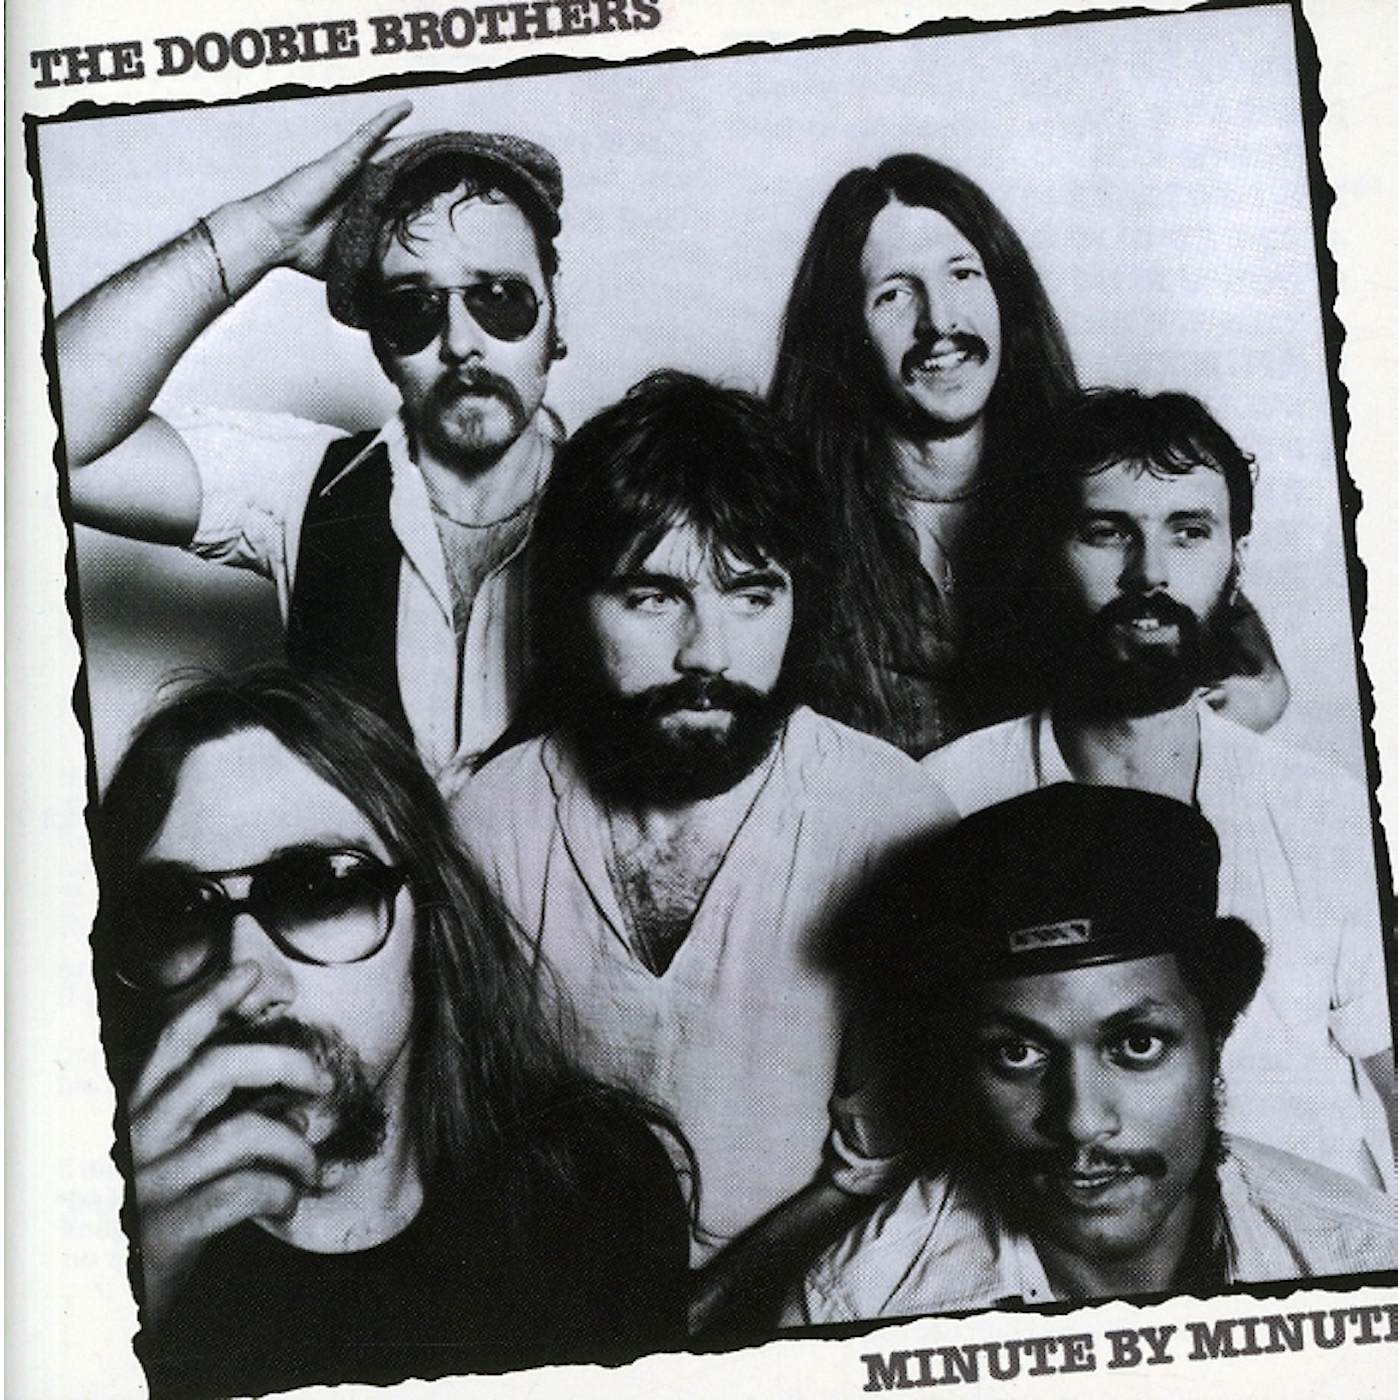 The Doobie Brothers MINUTE BY MINUTE CD